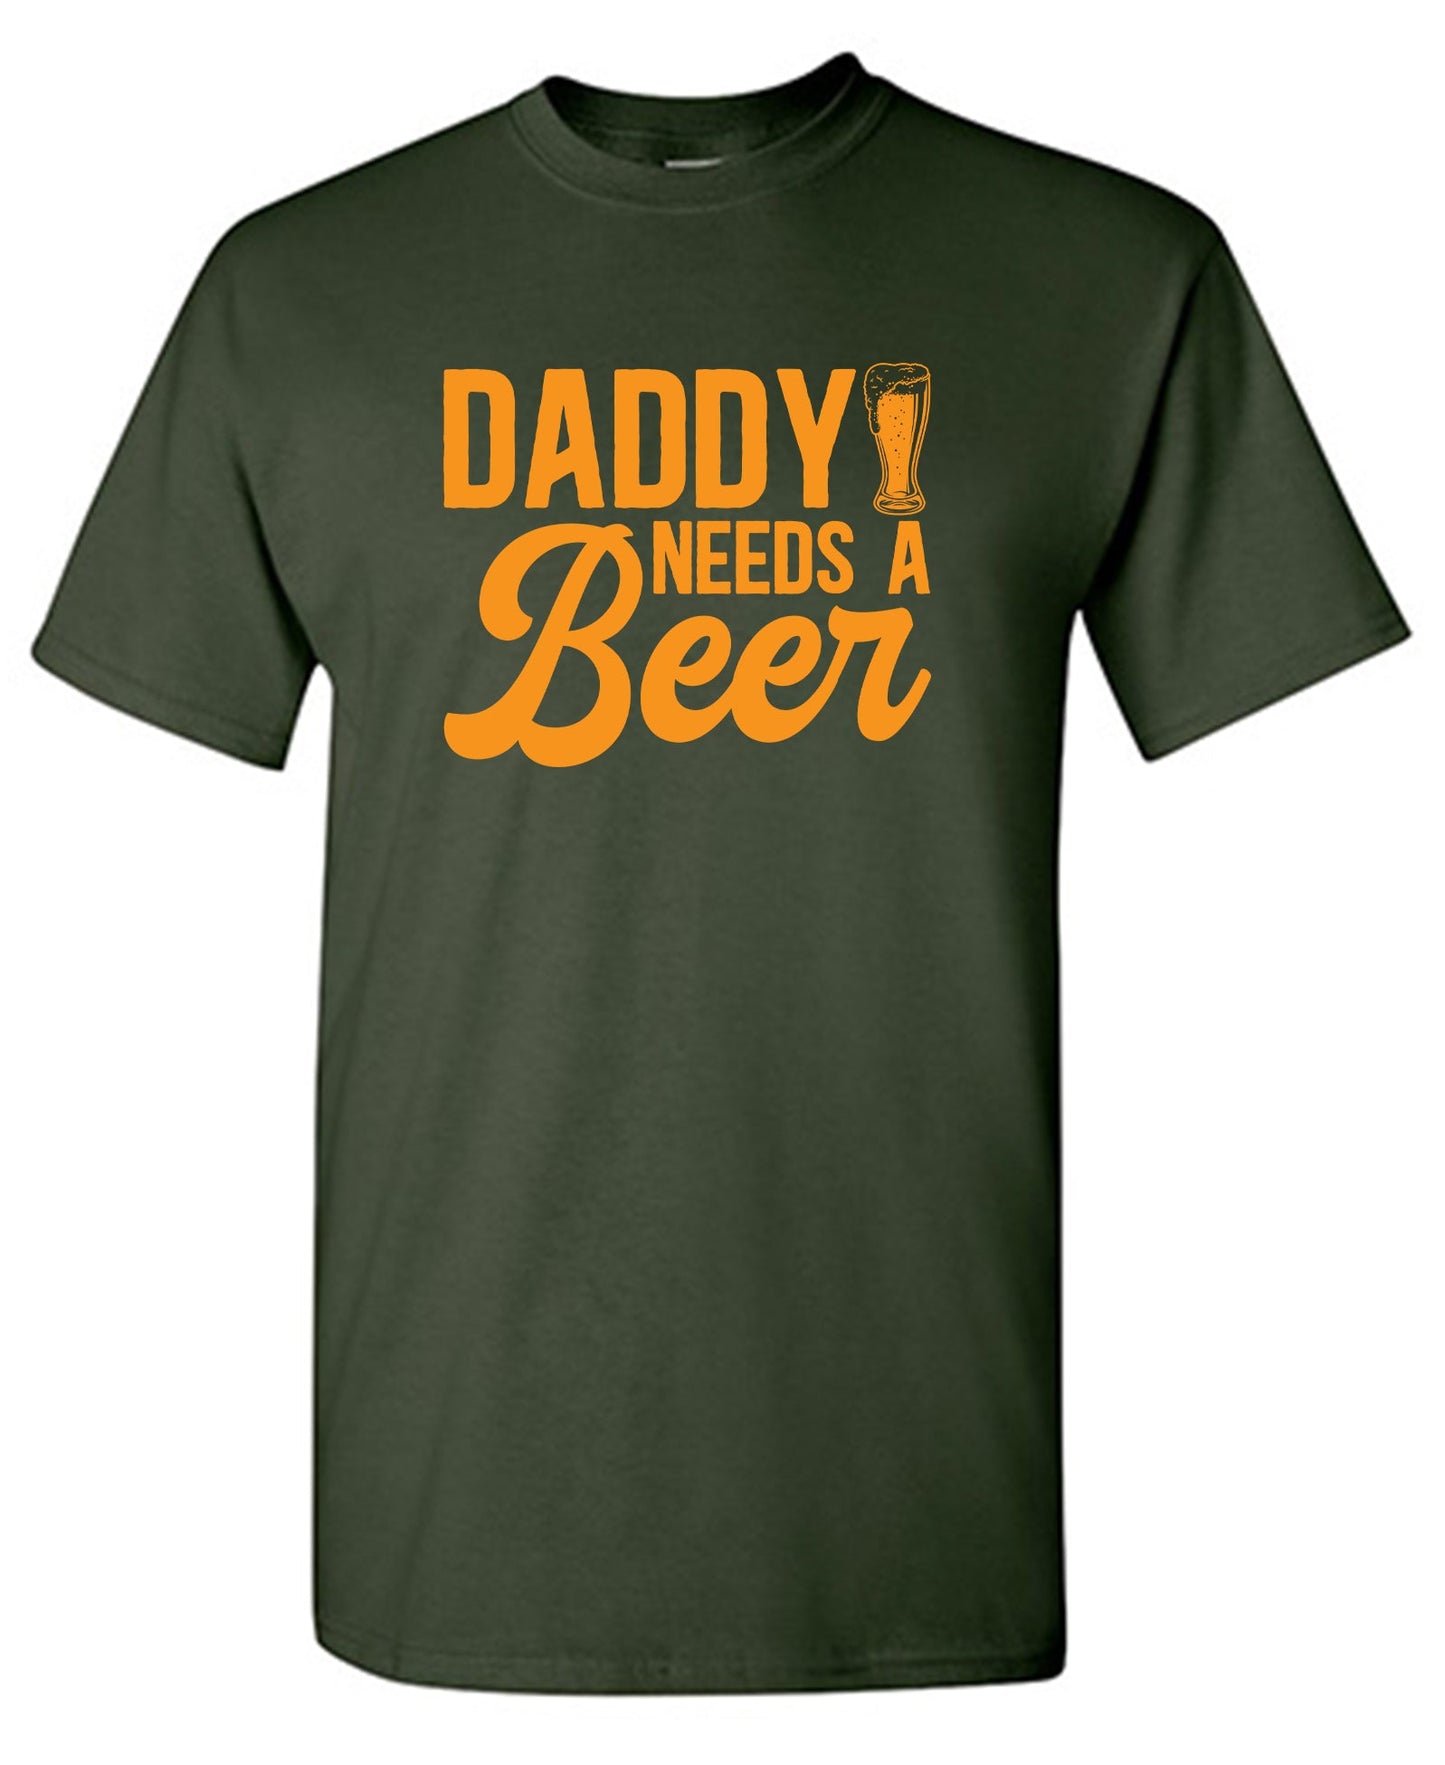 Daddy Needs A Beer - Funny T Shirts & Graphic Tees